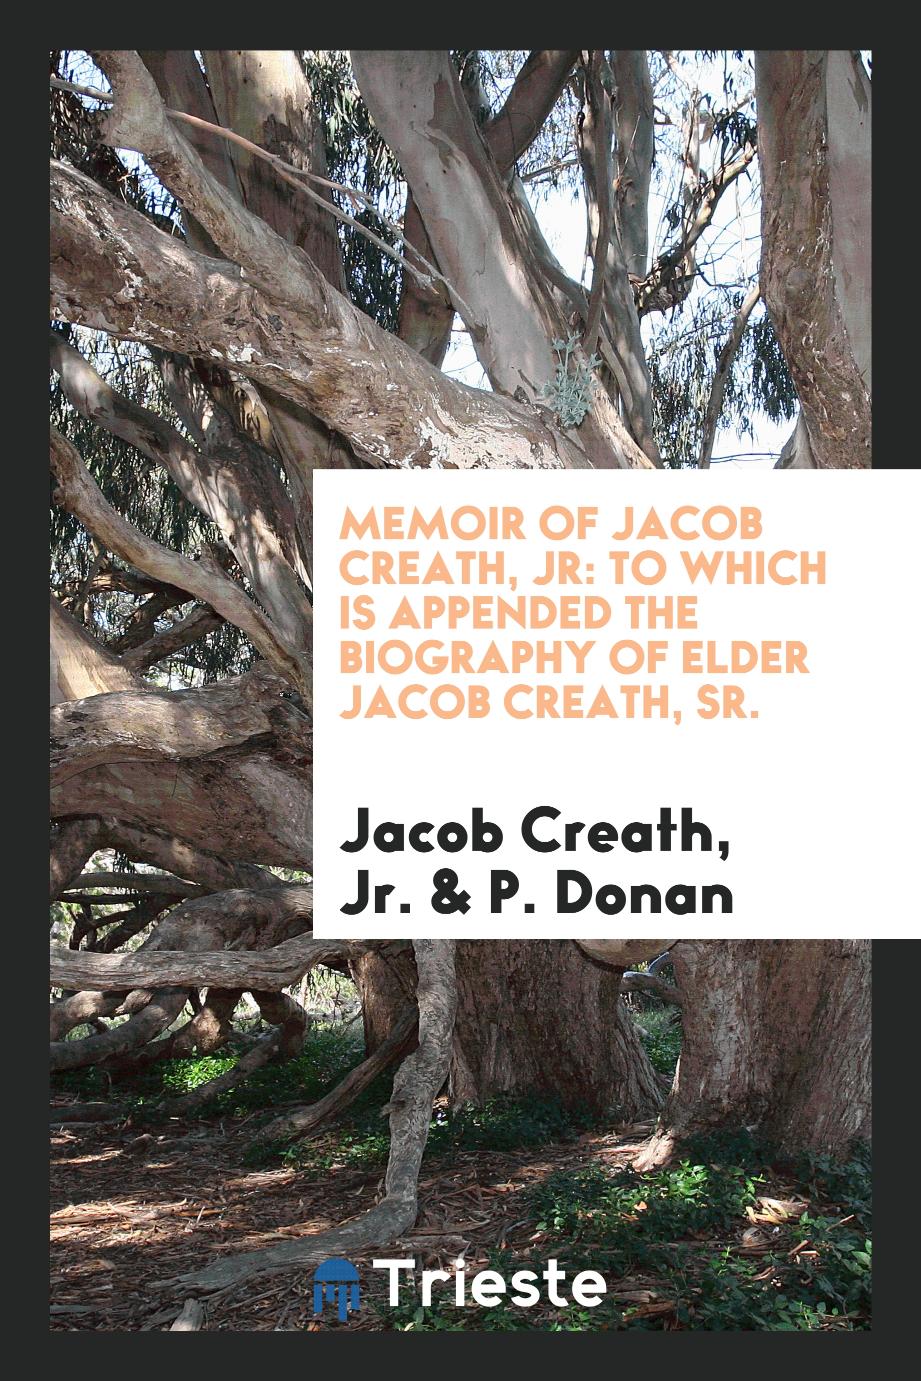 Memoir of Jacob Creath, Jr: to which is appended the biography of Elder Jacob Creath, Sr.